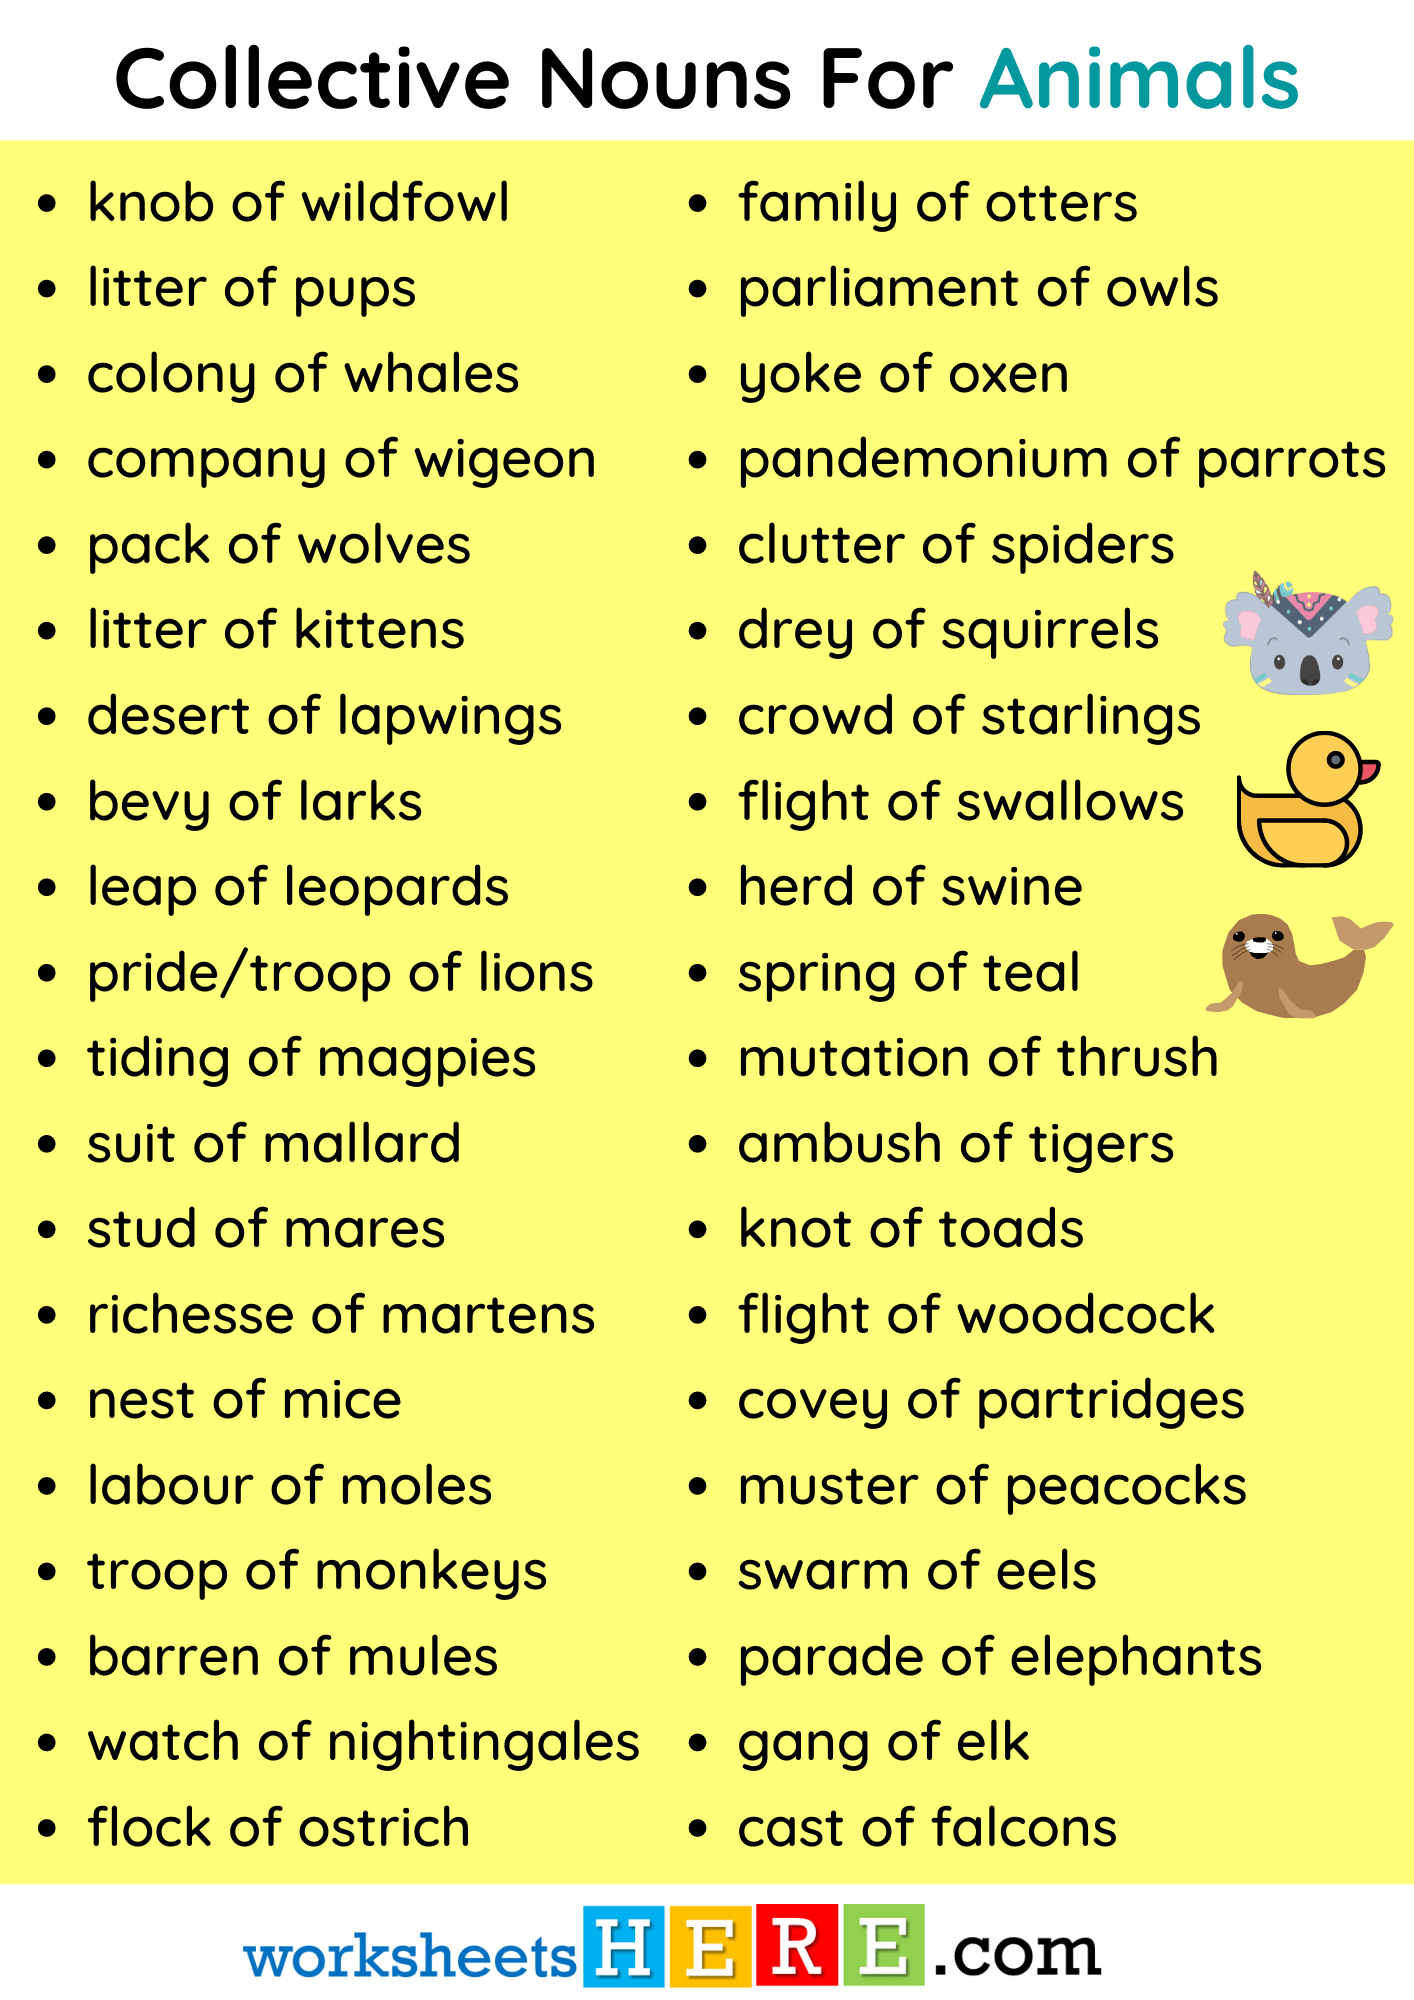 Collective Nouns For Animals PDF Worksheet For Students and Kids